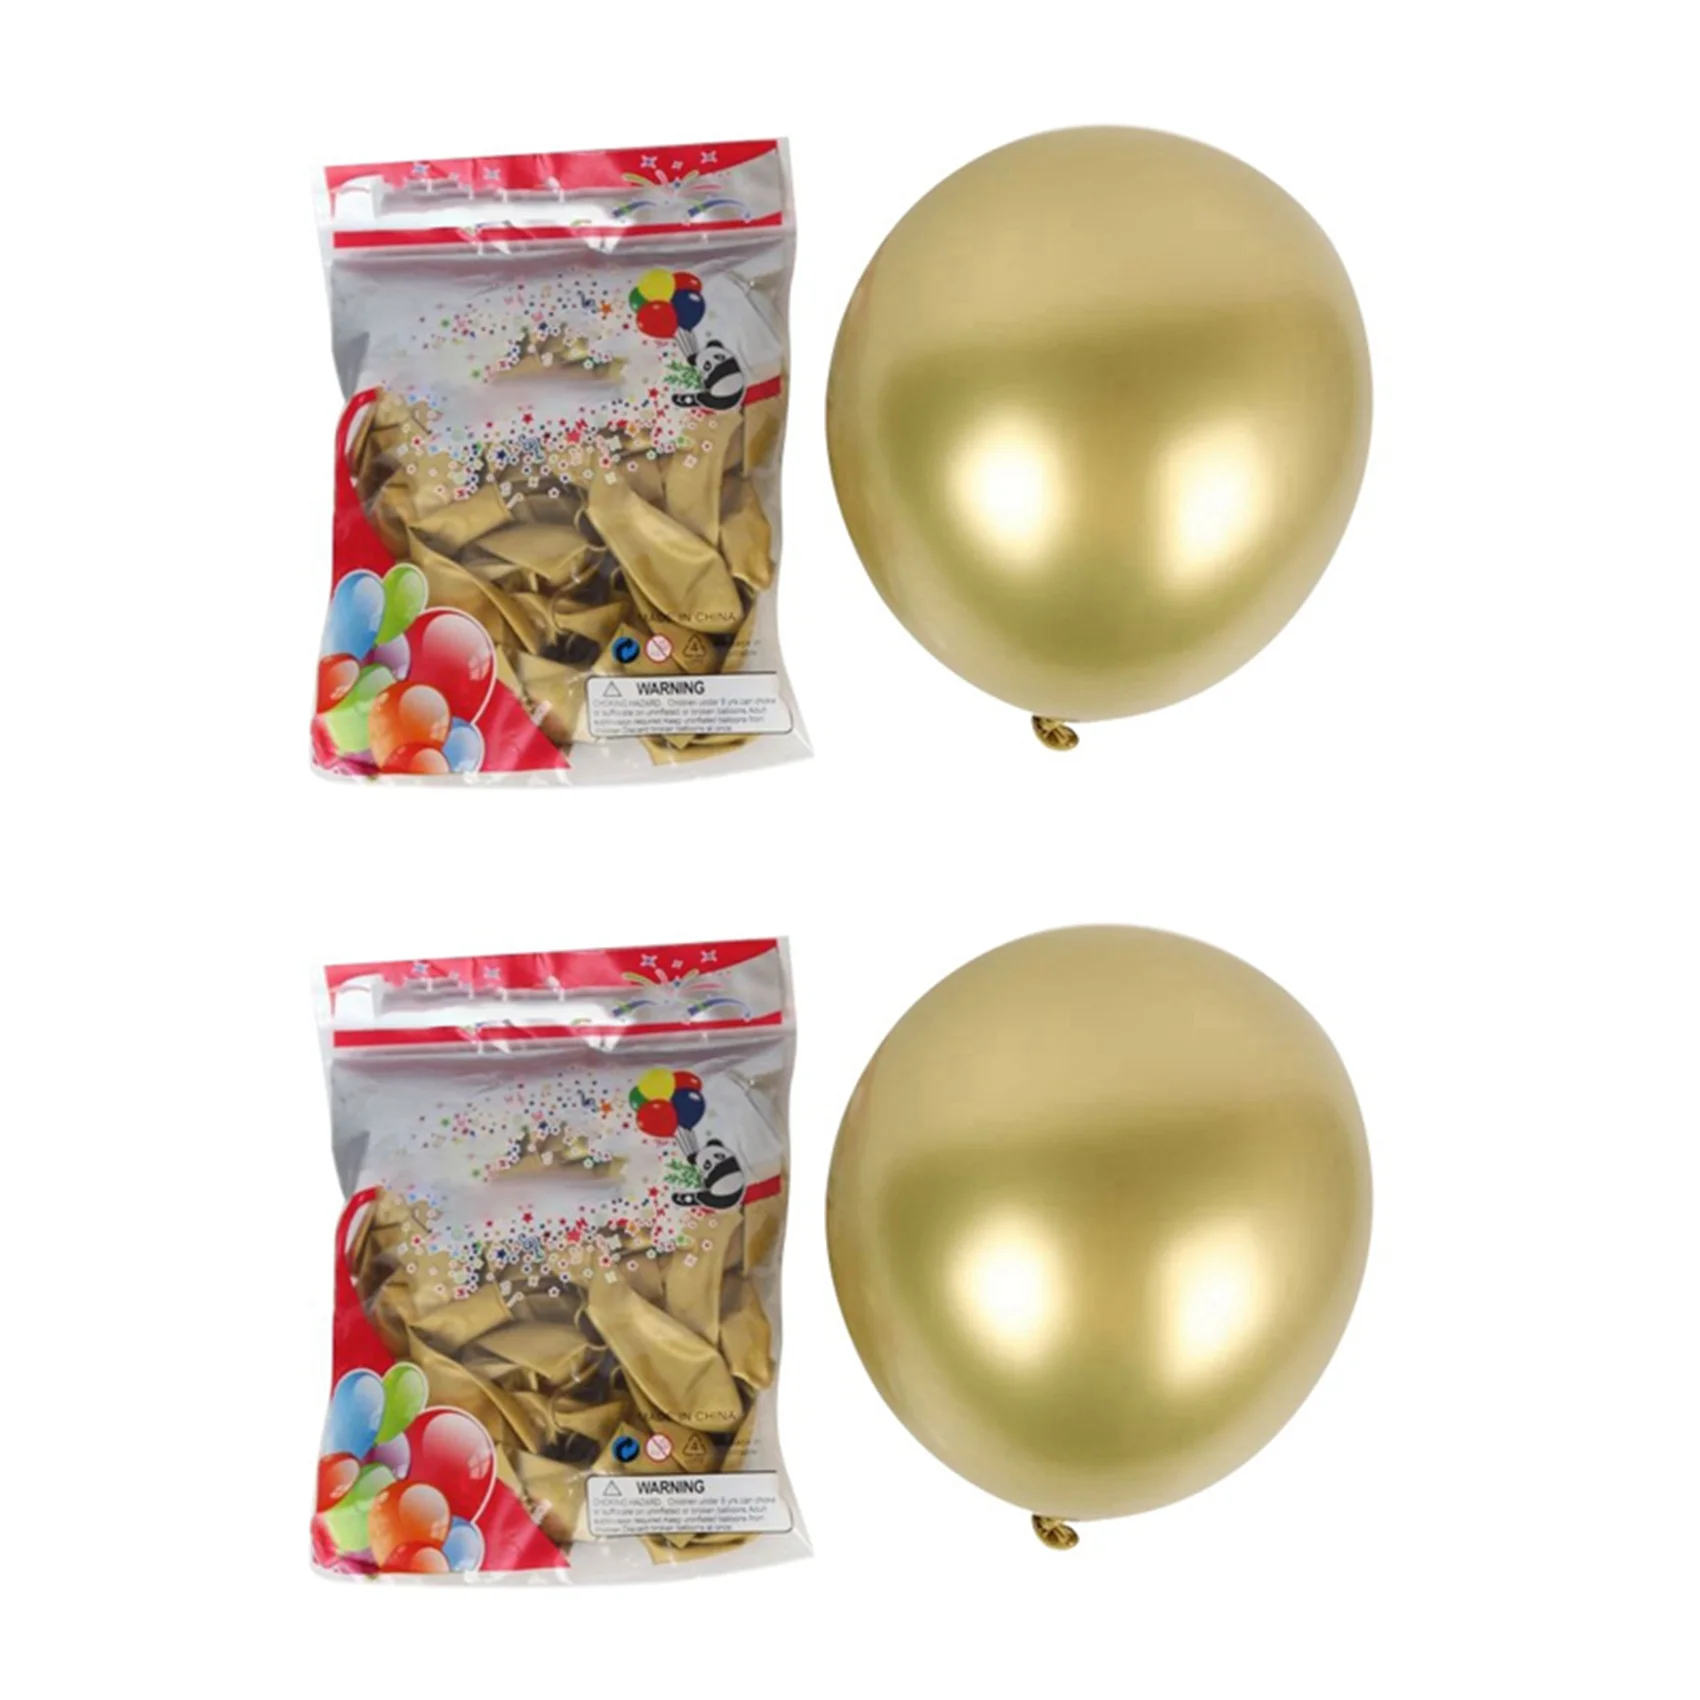 

100Pcs 10 Inch Metallic Latex Balloons Thick Chrome Glossy Metal Pearl Balloon Globos for Party Decor - Gold